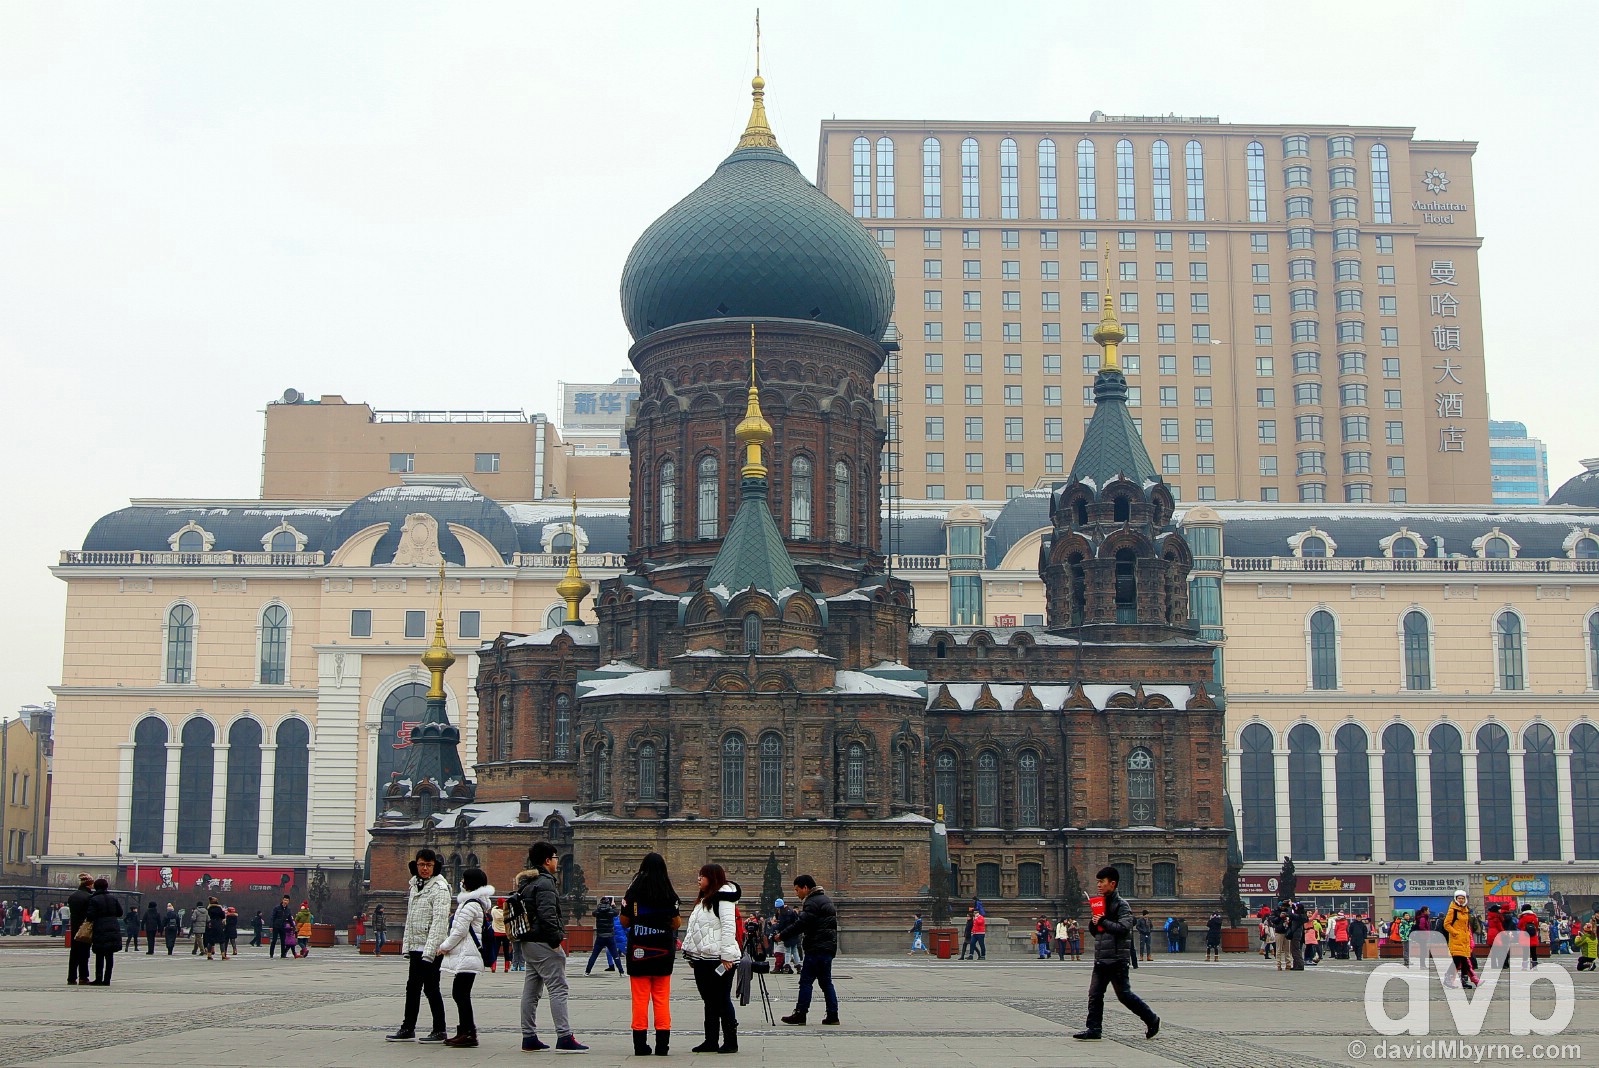 The Cathedral of the Holy Wisdom of God, a.k.a. the Russian Orthodox cathedral or formally St. Sofia's, in Harbin, China. February 6, 2015.